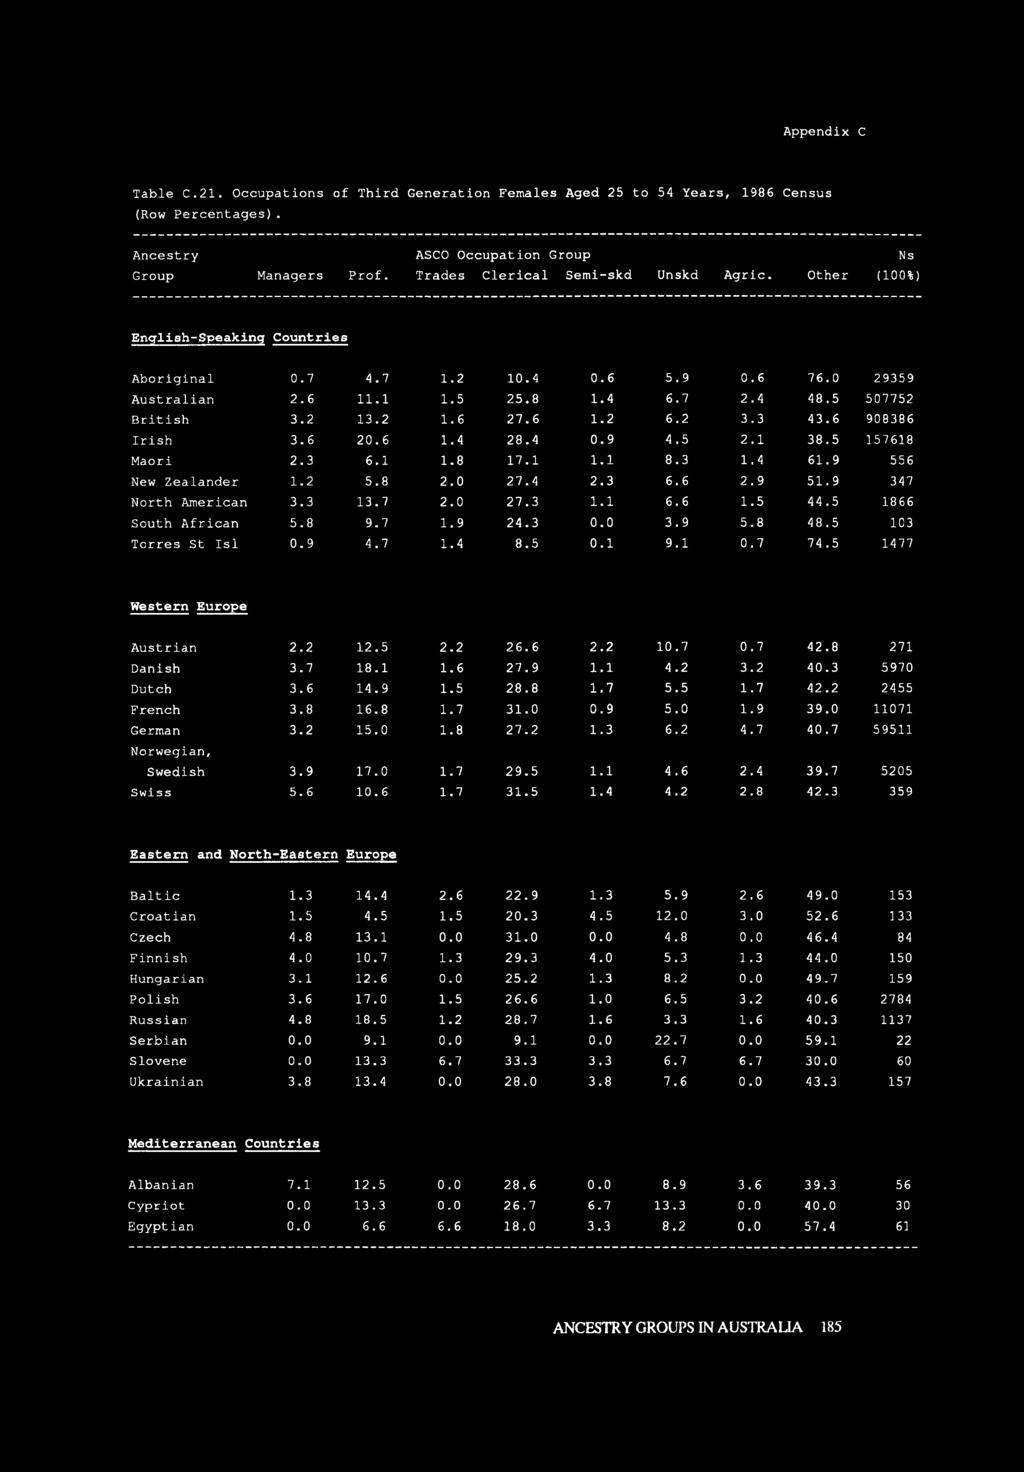 Appendix C Table C.21. Occupations of Third Generation Females Aged 25 to 54 Years, 1986 Census (Row Percentages). Group Managers Prof. ASCO Occupation Group Trades Clerical Semi-skd Unskd Agric.